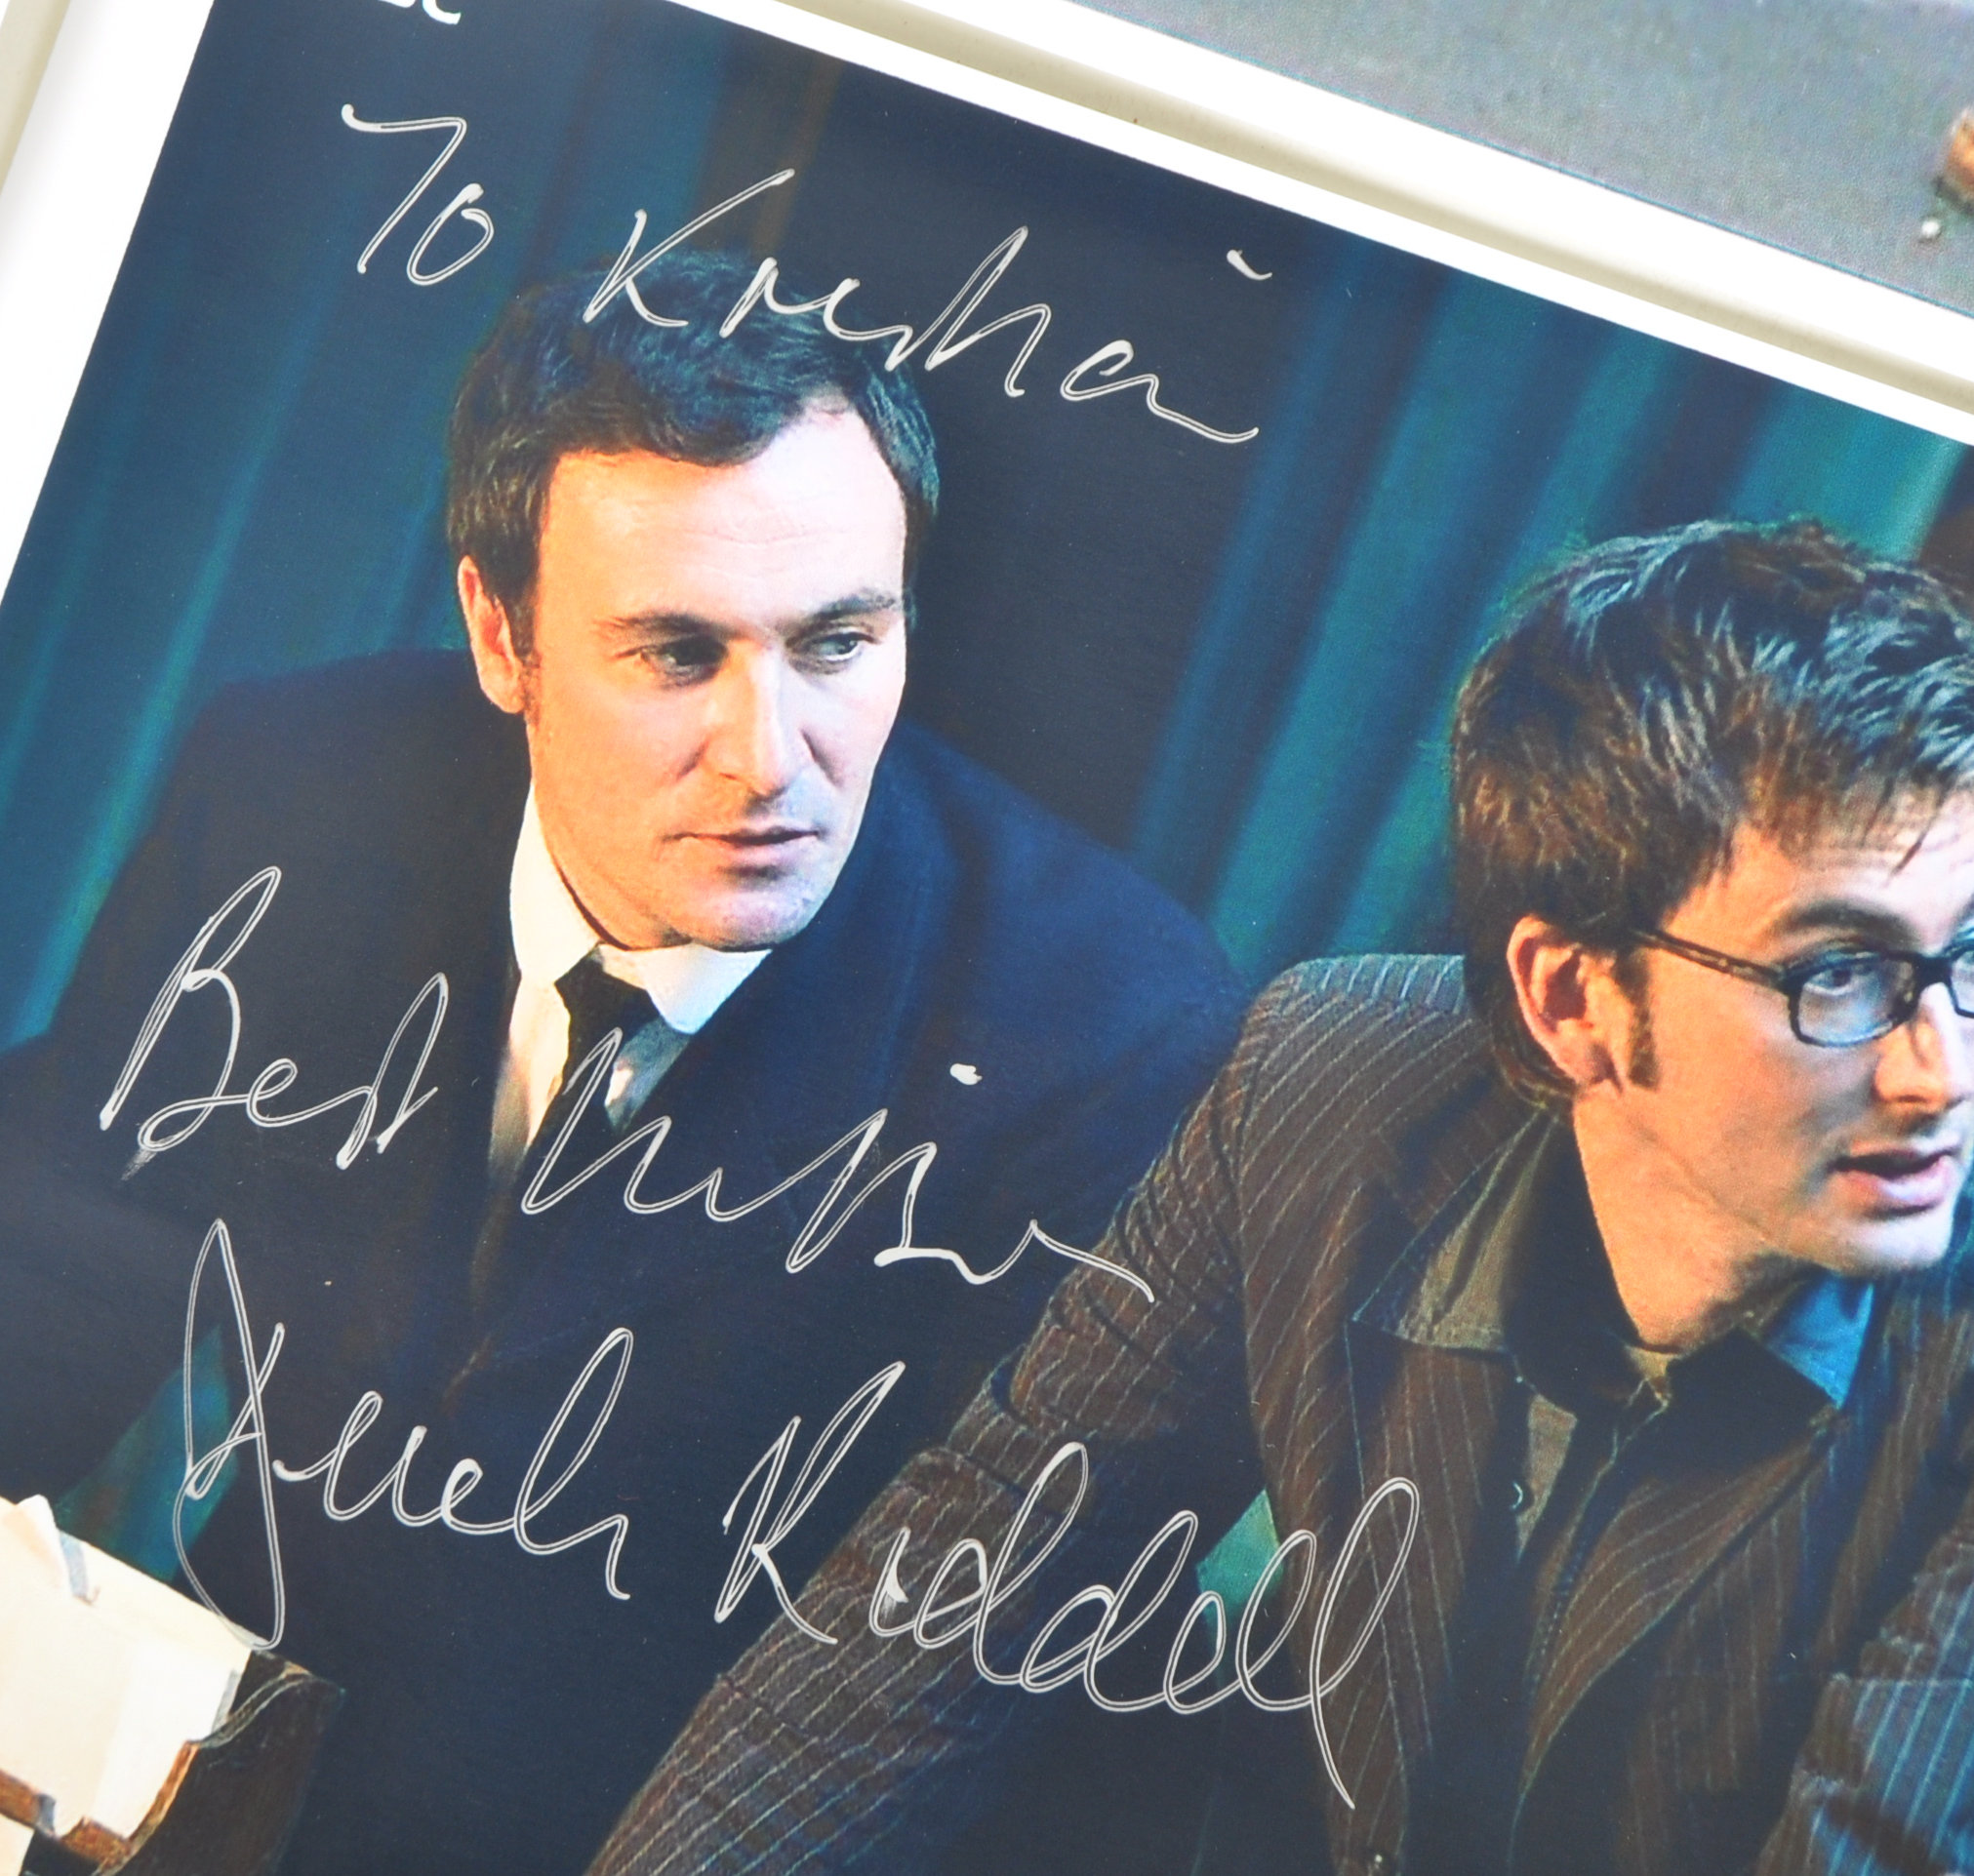 DOCTOR WHO - DAVID TENNANT ERA - AUTOGRAPH COLLECTION - Image 10 of 15